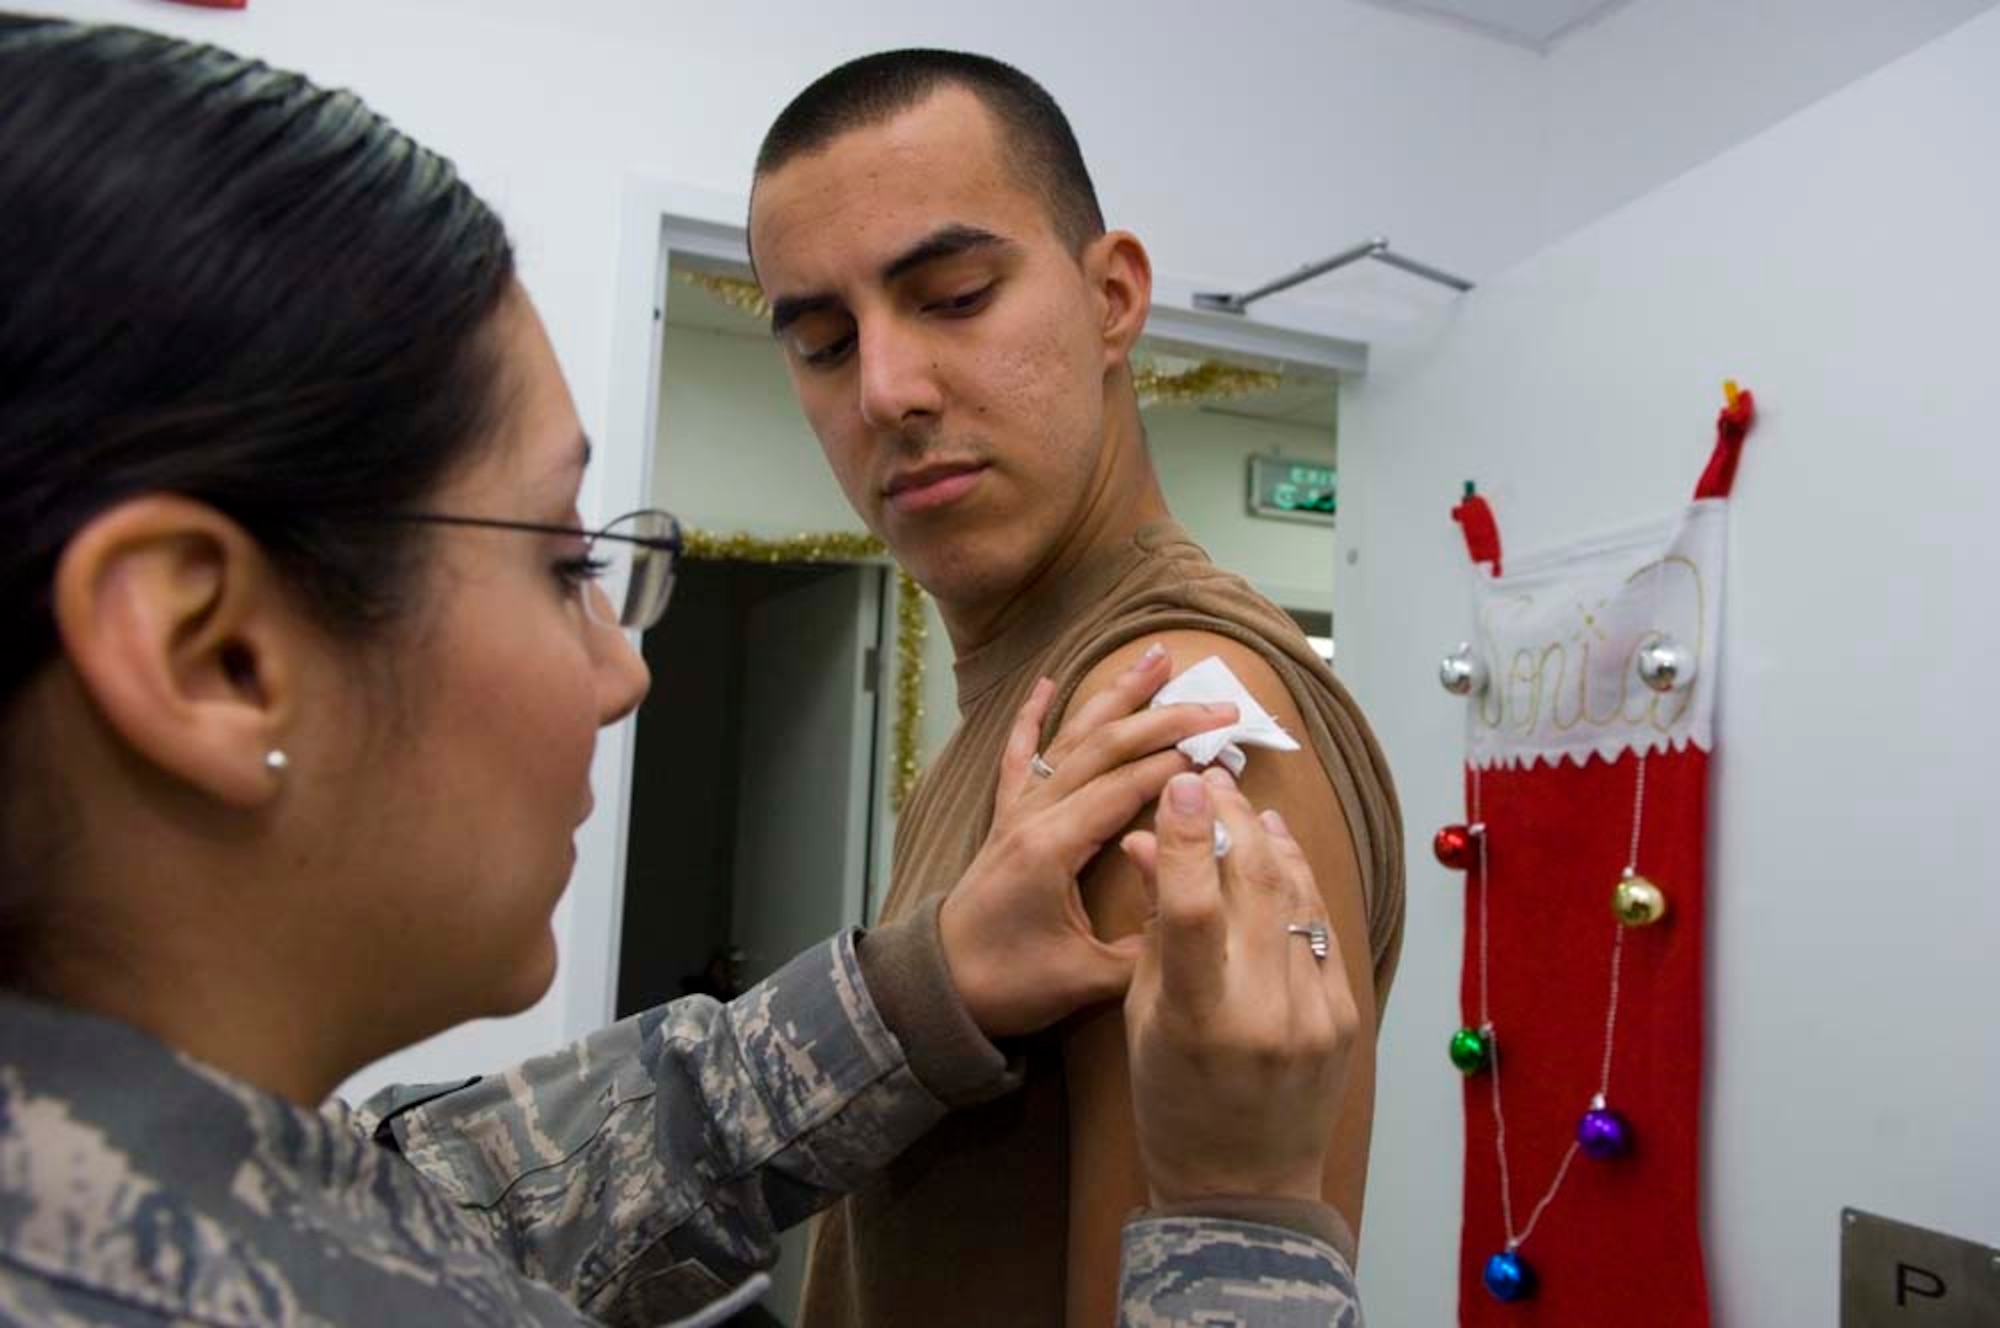 BALAD AIR BASE, Iraq -- Senior Airman Sonia Vega, a 332nd Expeditionary Aerospace Medical Squadron medical technician, administers the typhoid vaccination to Senior Airman Jedediah Villanueva, a 332nd Expeditionary Maintenance Squadron conventional maintainer, at the Air Force Clinic here, Dec. 27. Airman Vega is deployed from Barksdale Air Force Base, La., and Airman Villanueva is deployed from Spangdahlem Air Base, Germany. (U.S. Air Force photo/Staff Sgt. Travis Edwards)